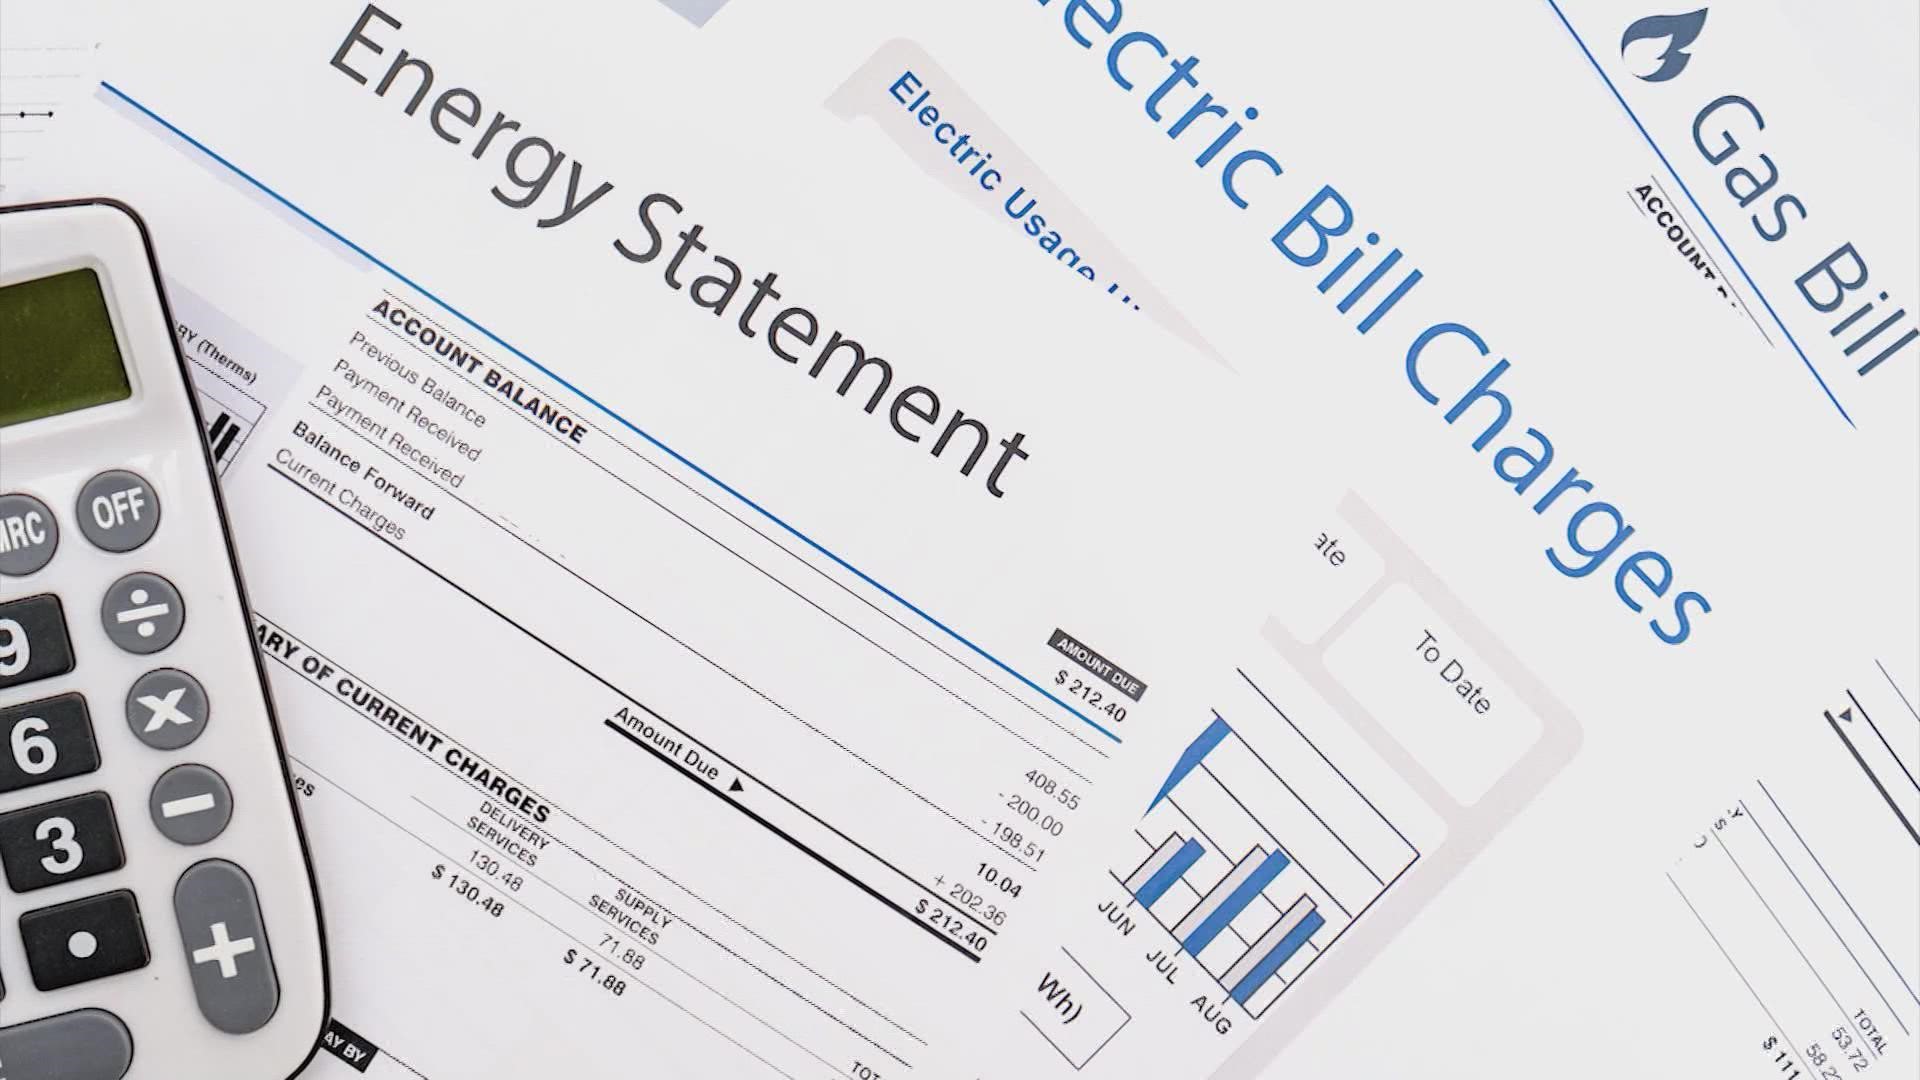 As temperatures heat up over the summer months,  your energy bill may go up too. Experts say energy costs are up 70% in the last year.